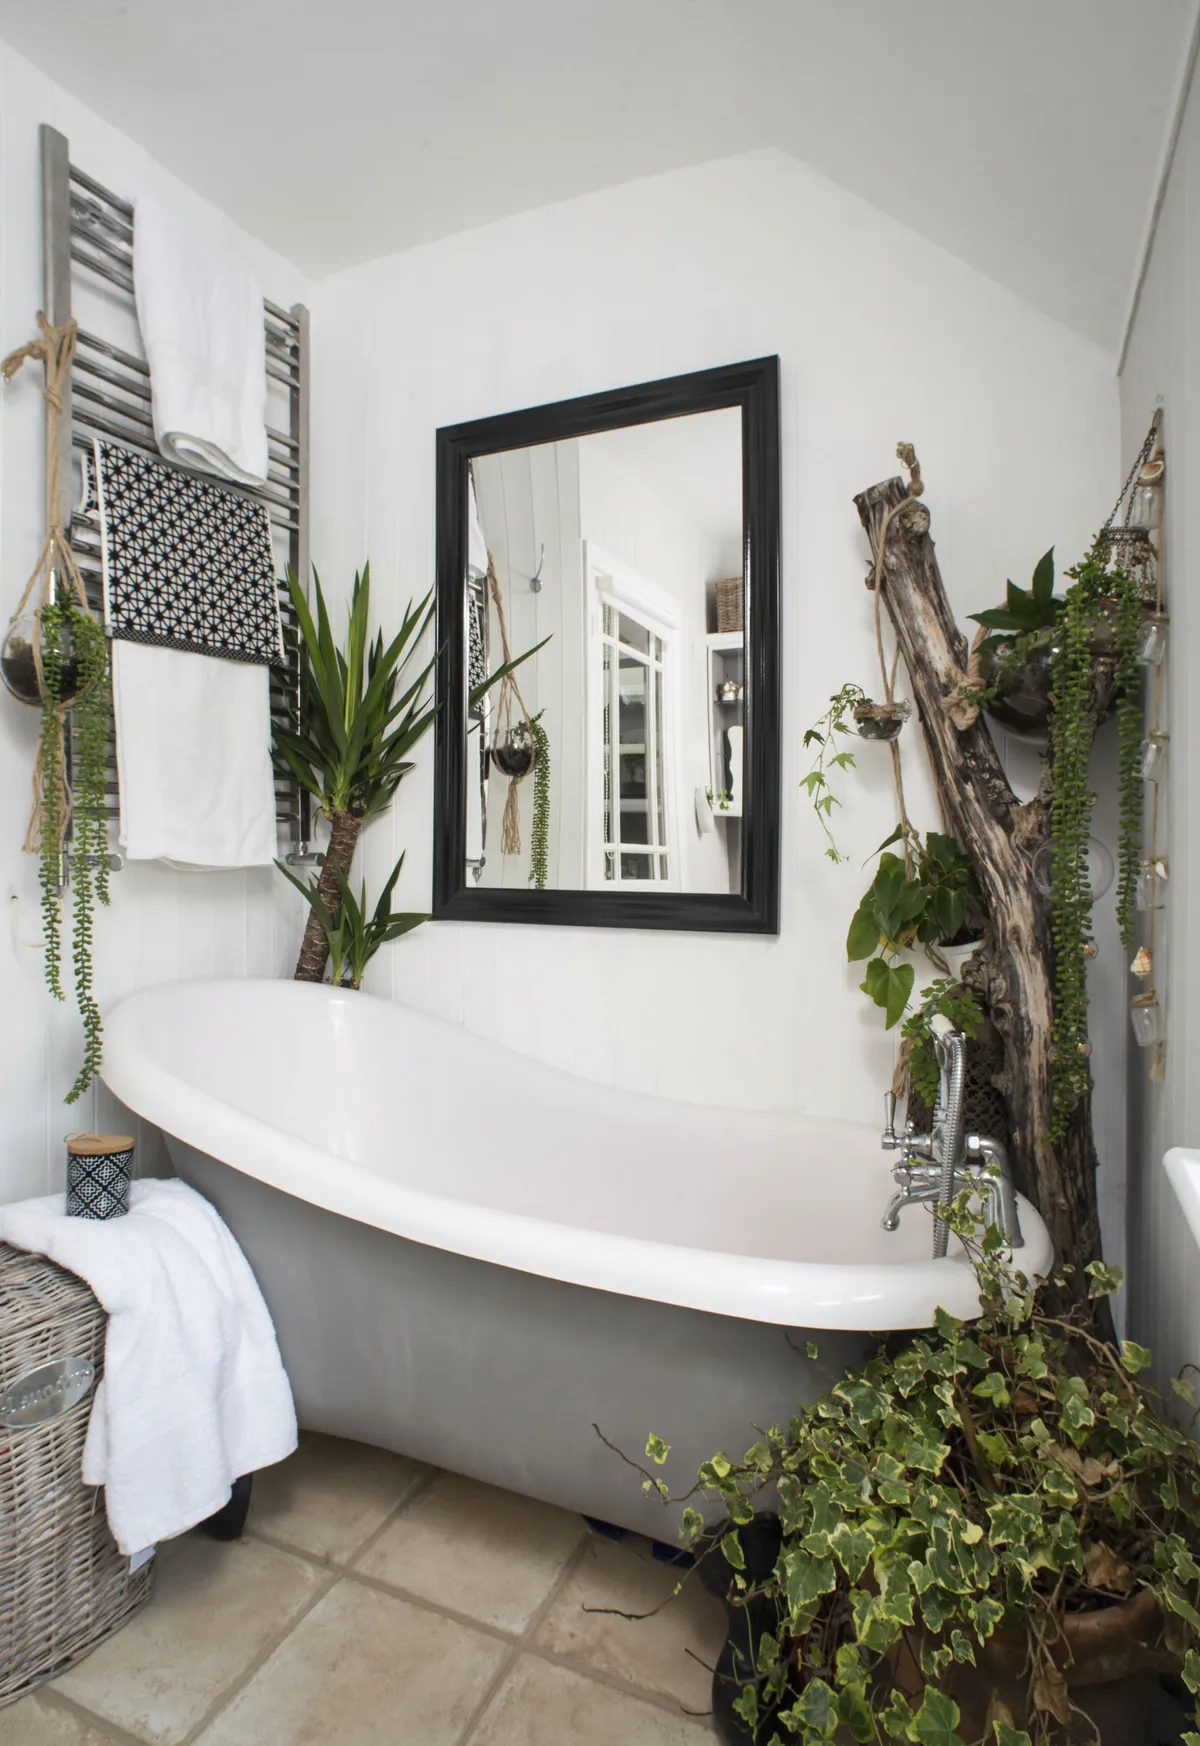 Danecia has created a luxury spa look on a budget in her bathroom, painting the roll-top bath in Farrow & Ball’s Mole’s Breath and adding lots of lush greenery so it feels like an exotic retreat